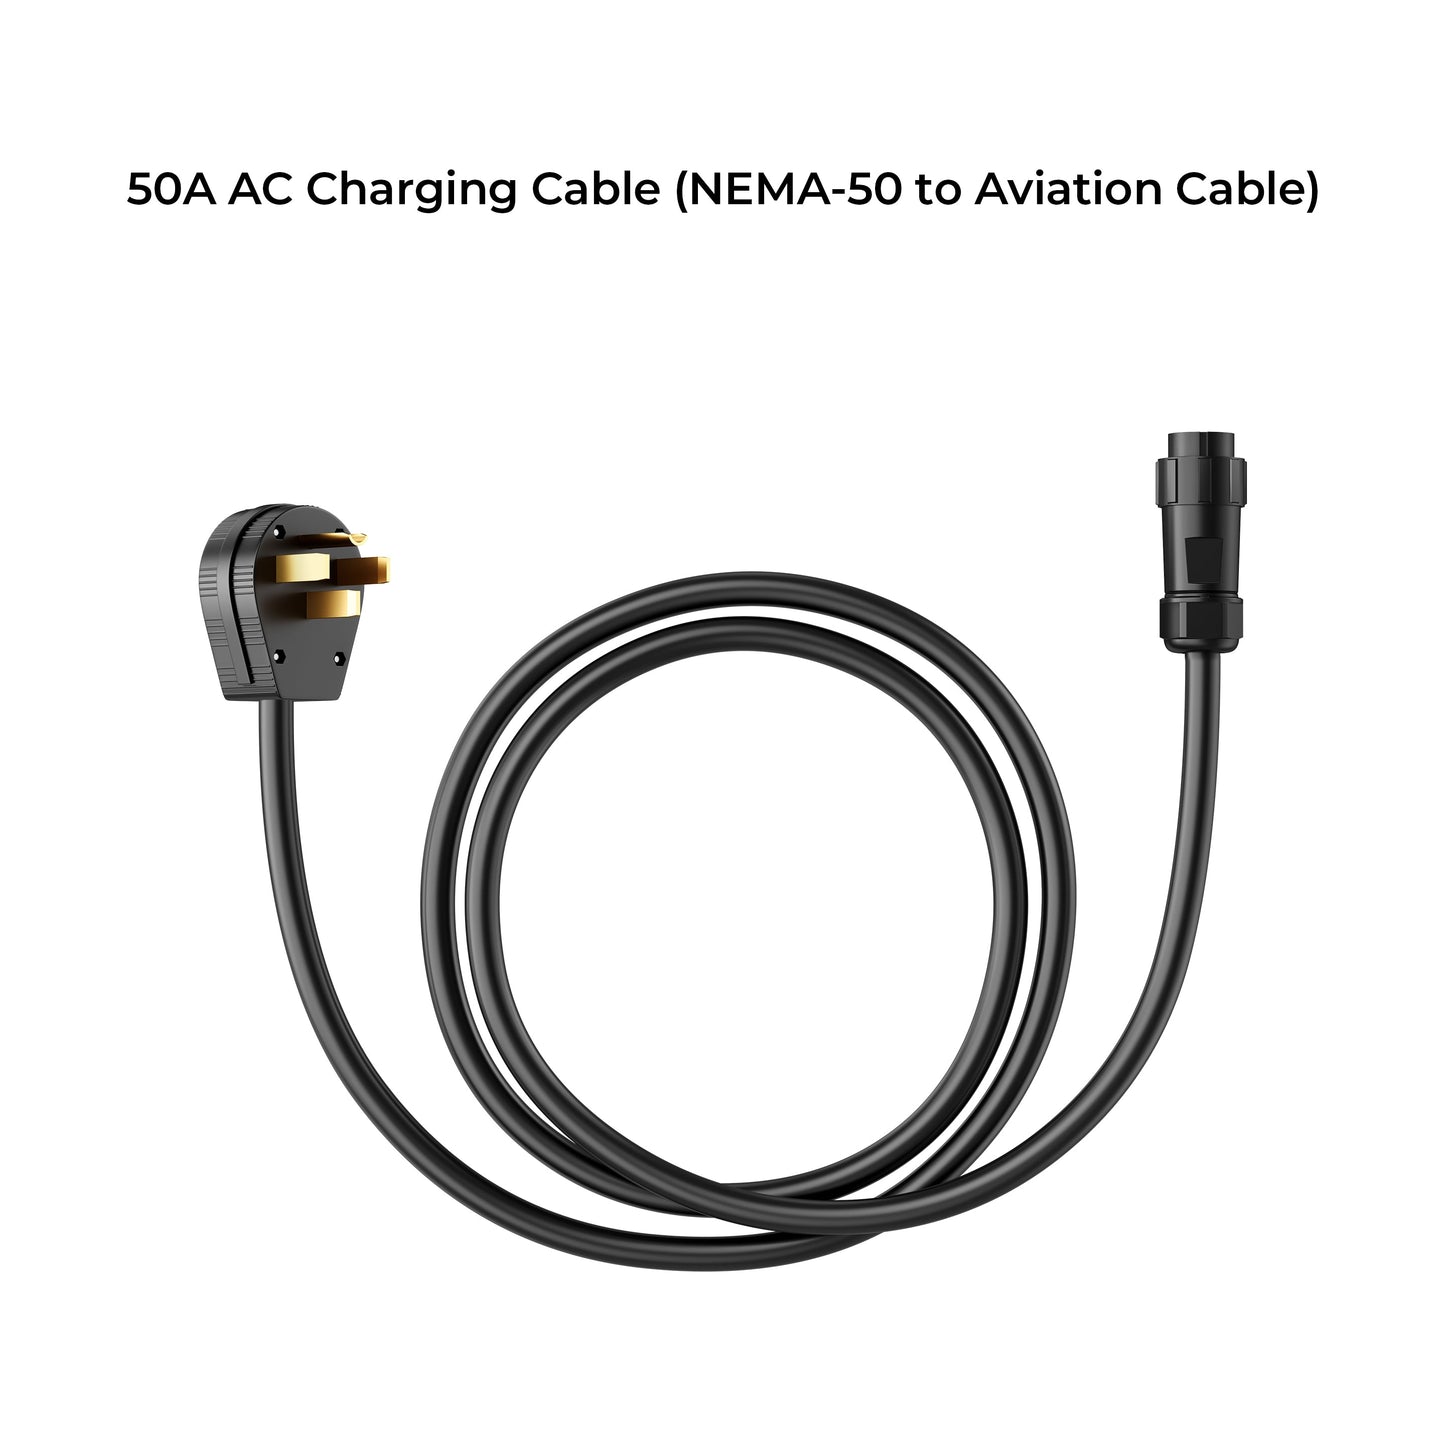 AC CHARGING CABLE